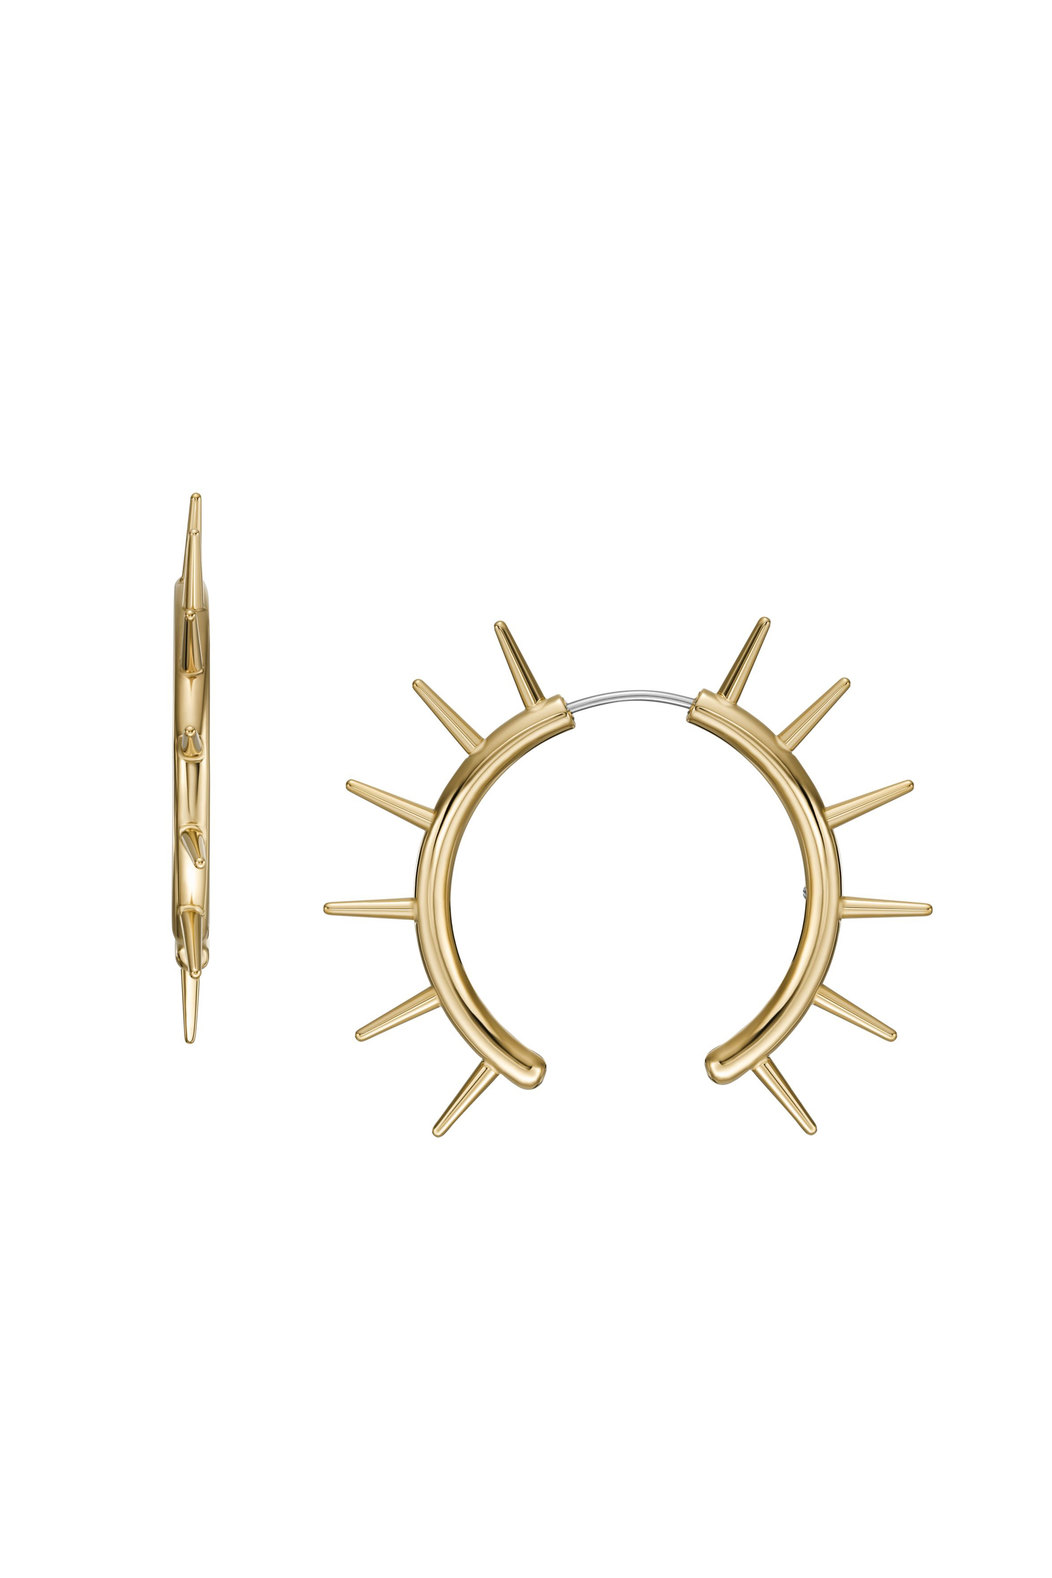 Gold-Tone Stainless Steel Front to Back Earrings